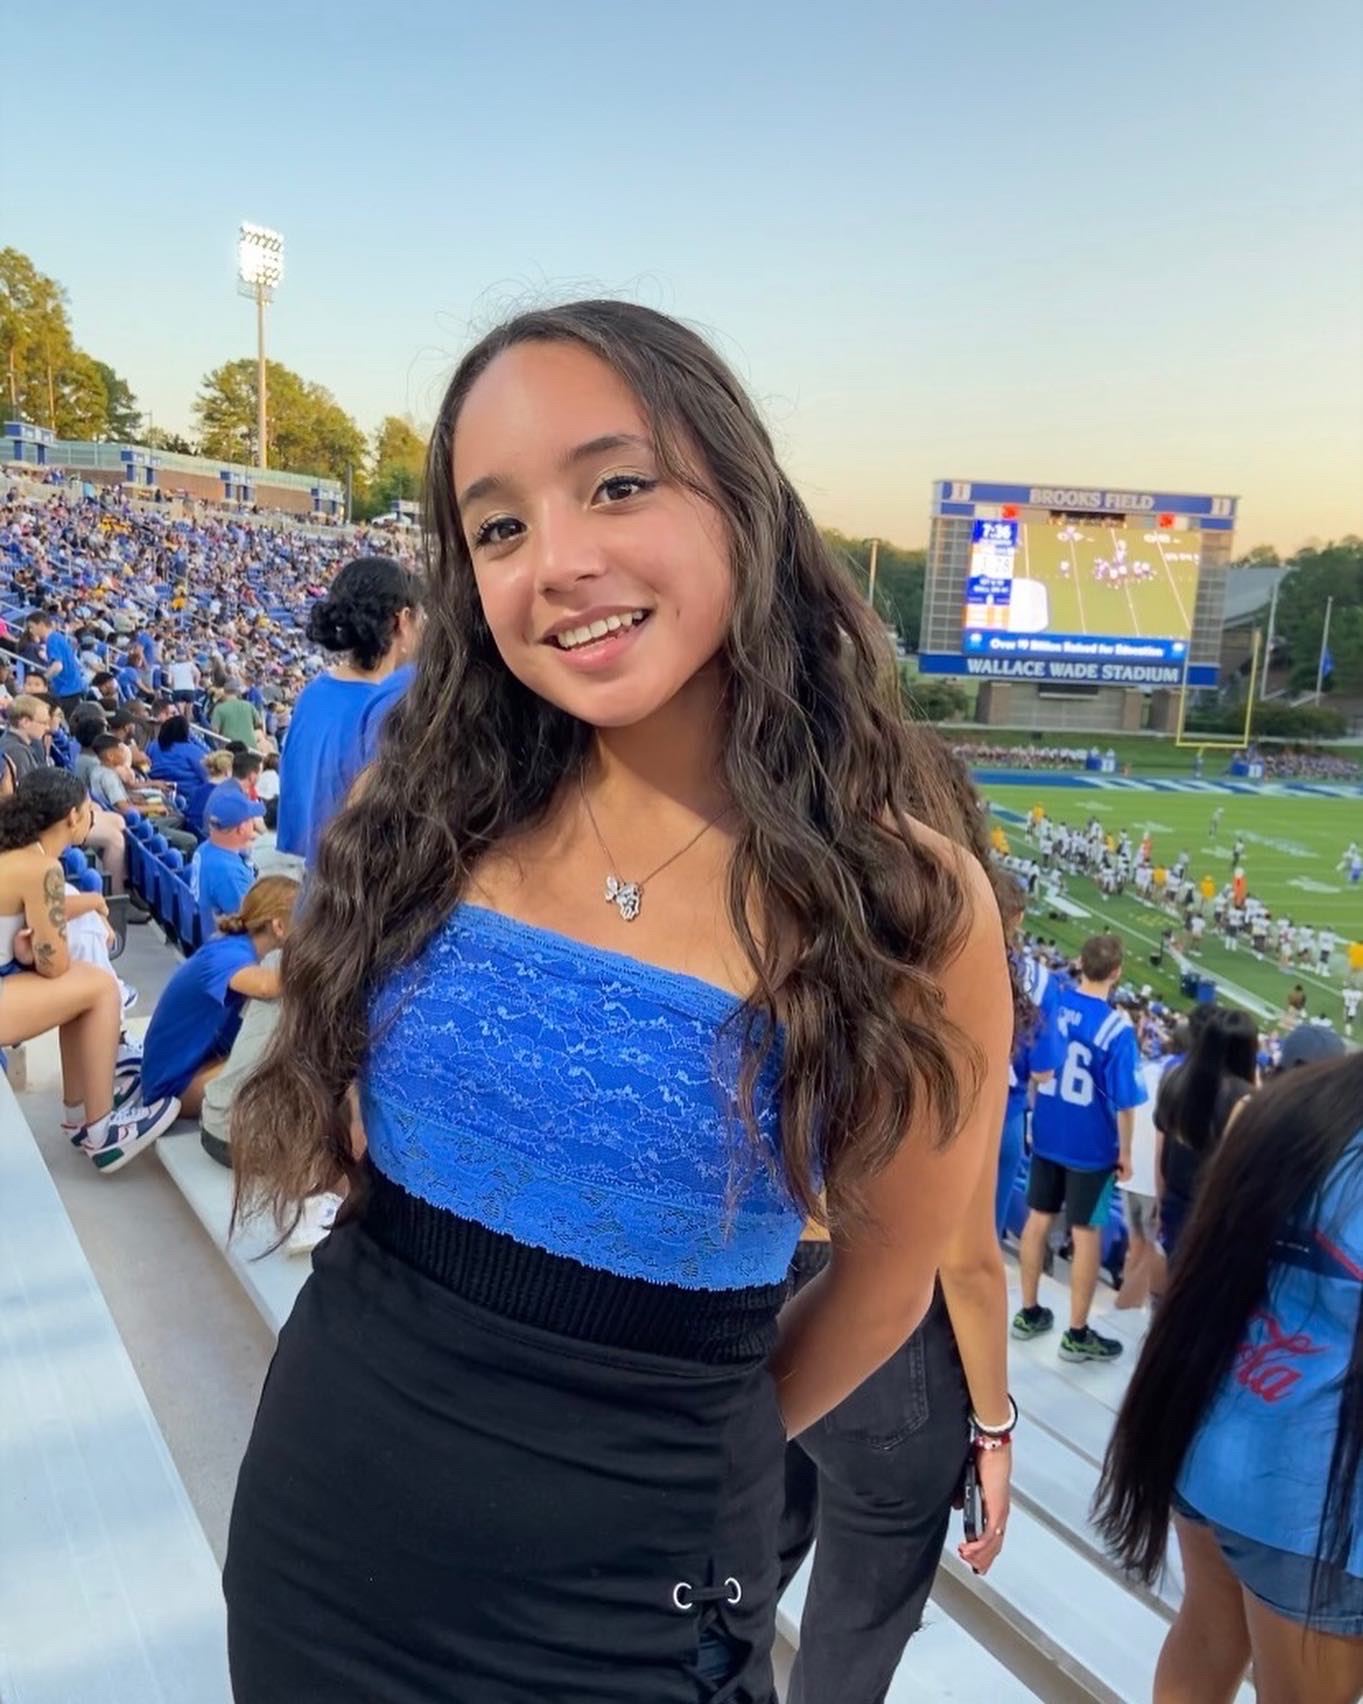 Cristal at a football game wearing blue and black